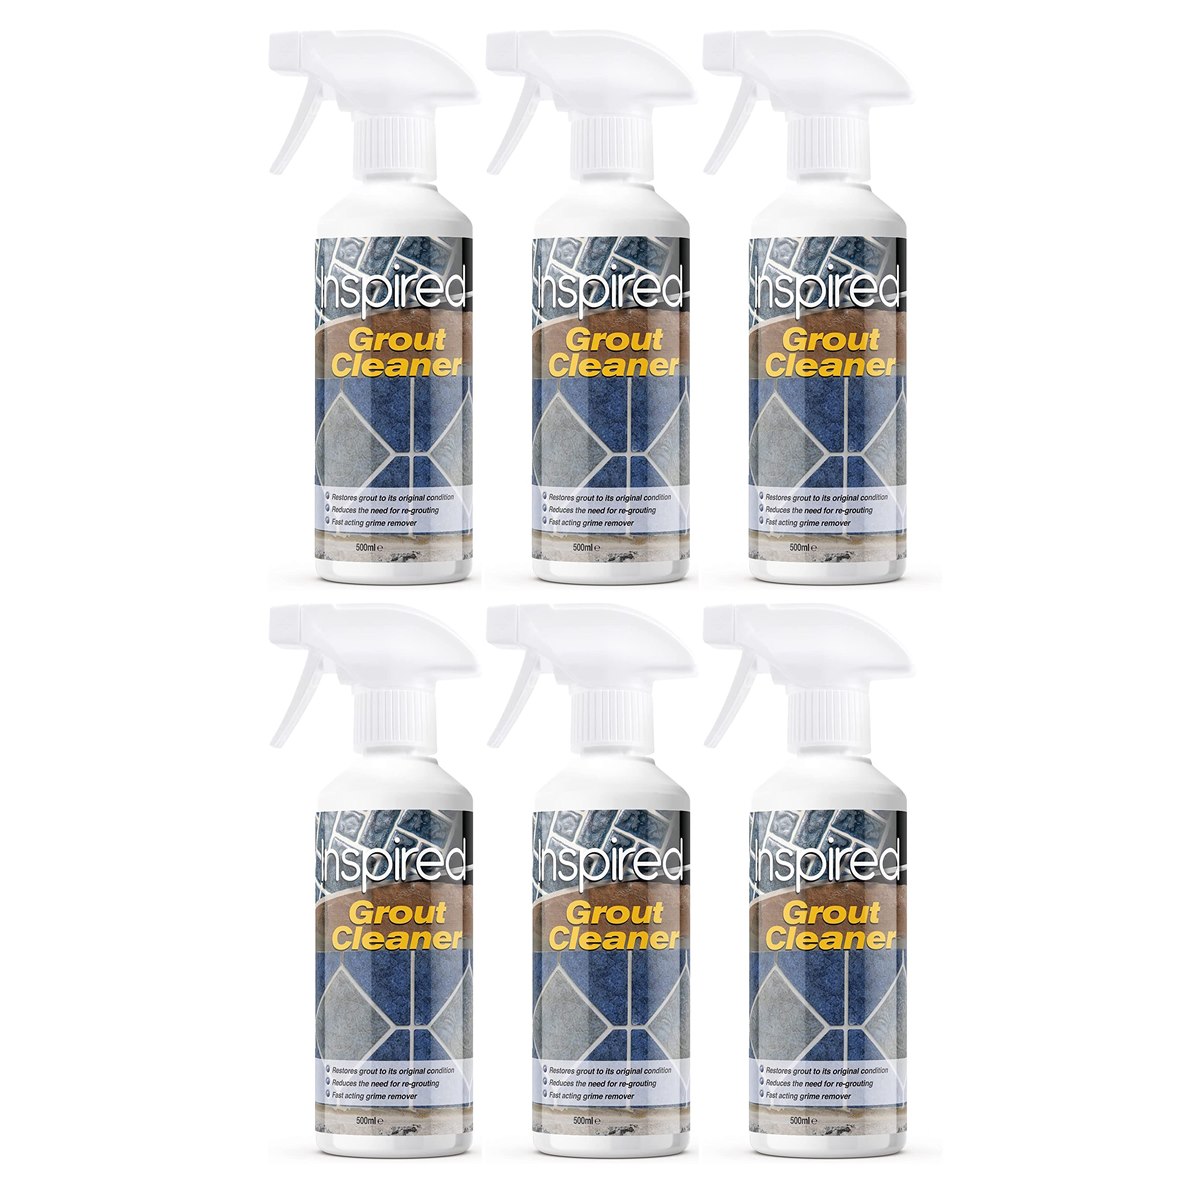 Case of 6 x Inspired Grout Cleaner Spray 500ml